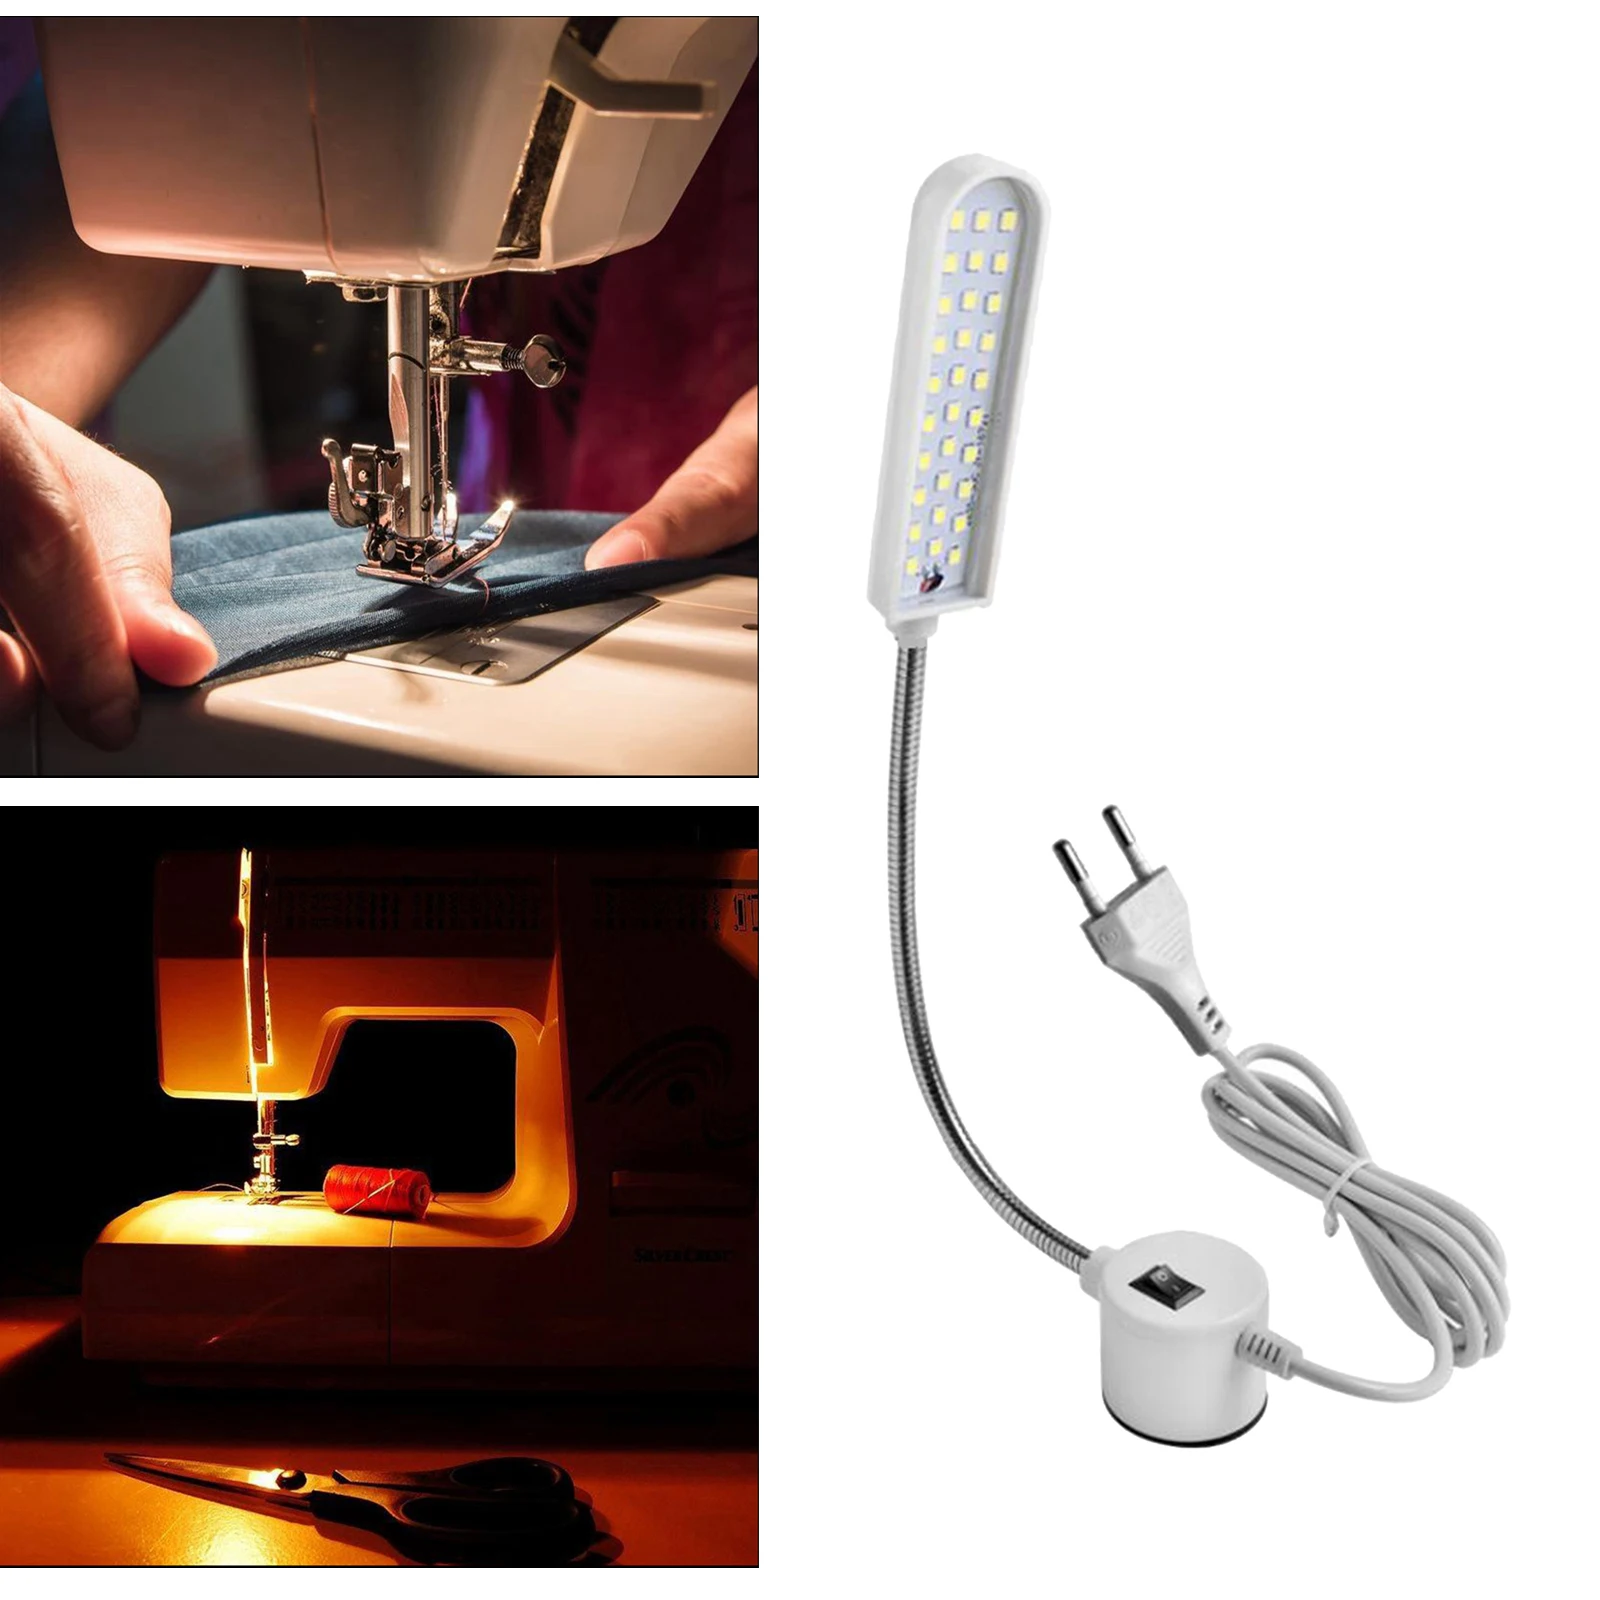 USB Sewing Machine Light 110-240V Super Bright Sewing Strip Light 30 LEDs with Switch Button for All Sweing Machine